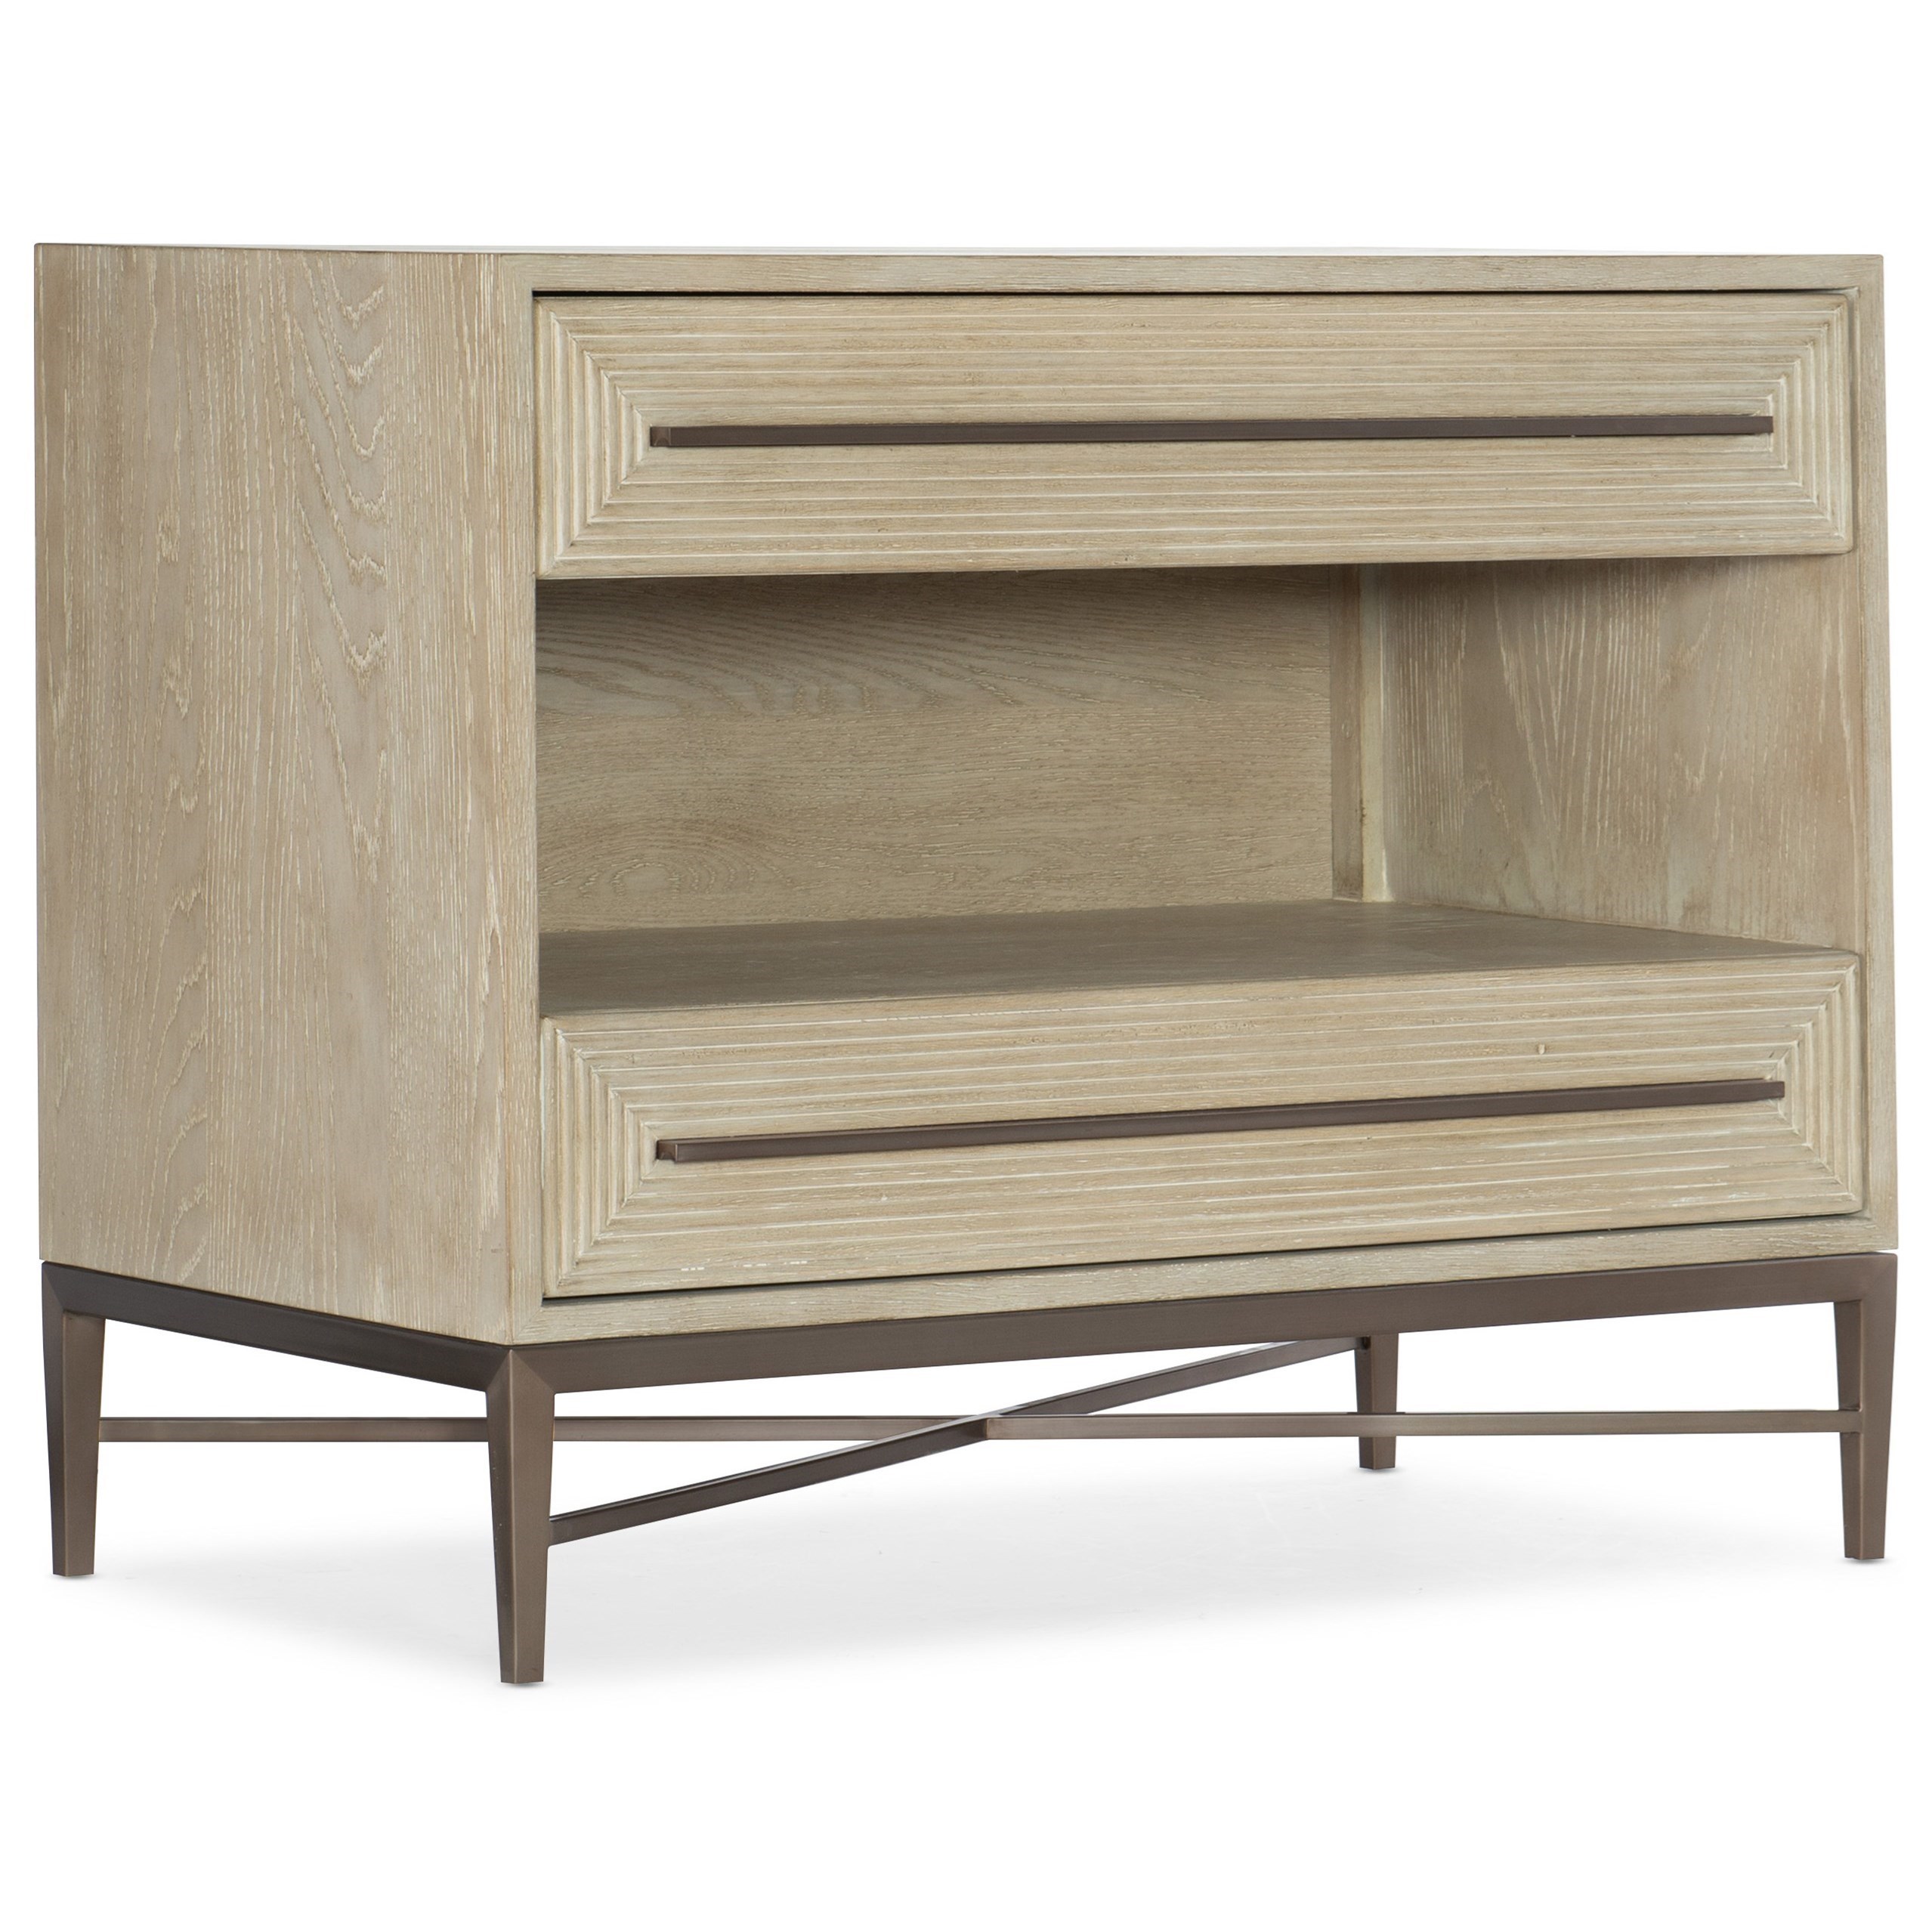 Contemporary Nightstand with USB Port